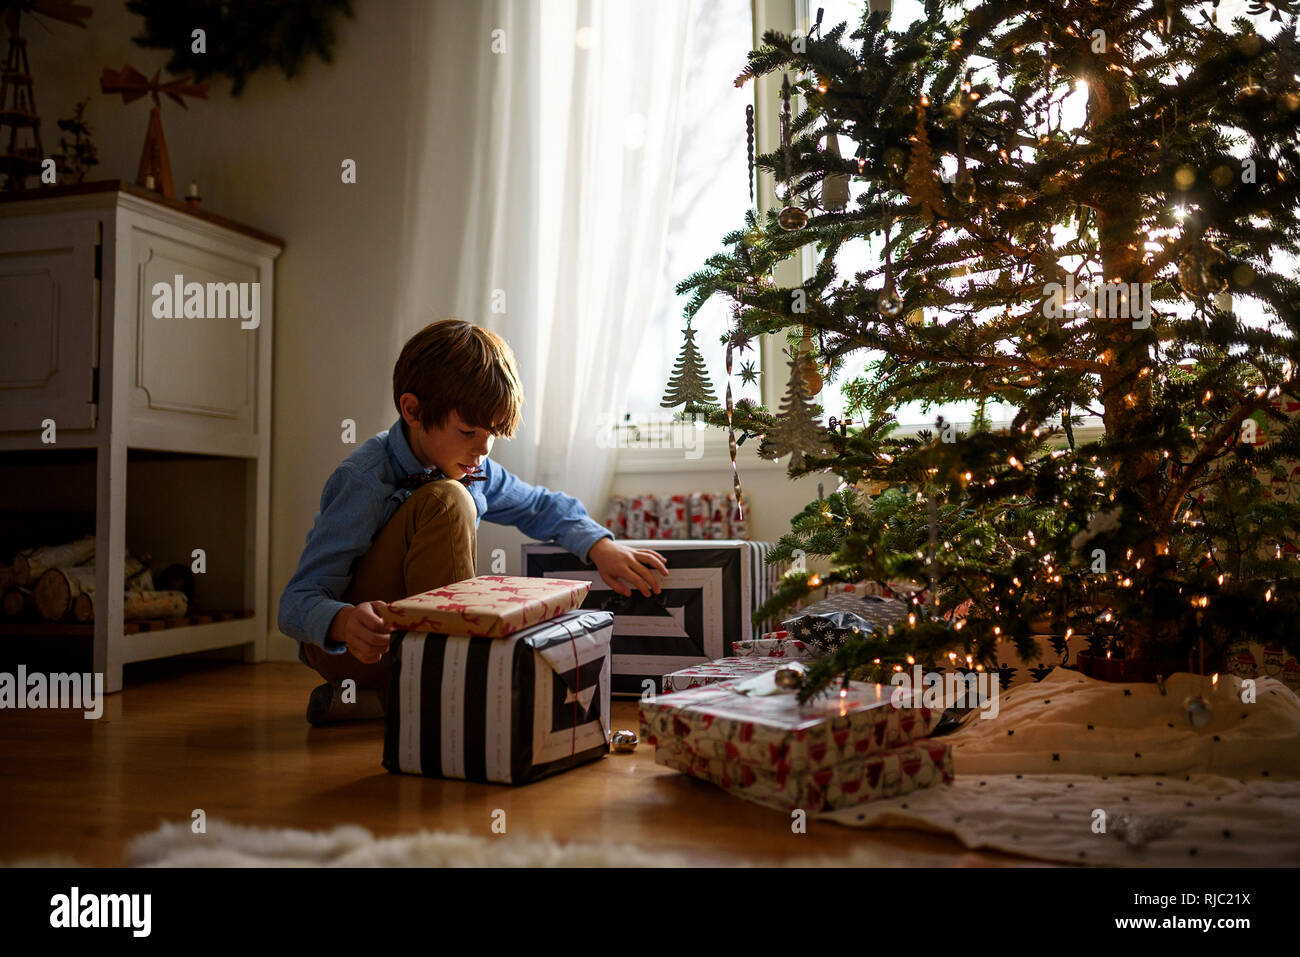 Boy kneeling in front of a Christmas tree looking at gifts Stock Photo